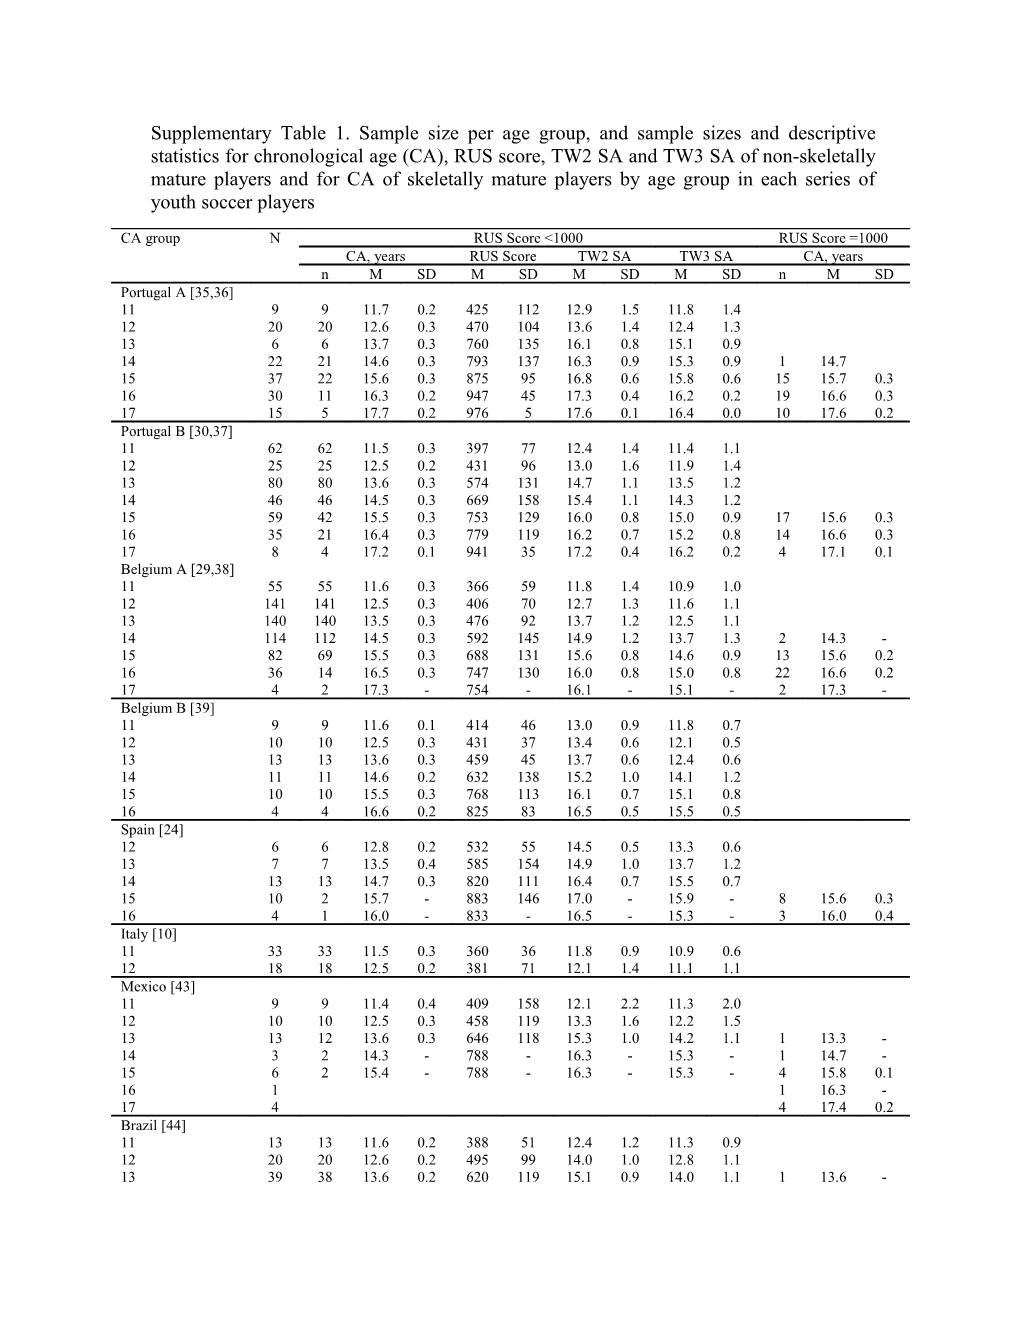 Supplementary Table 1. Sample Size Per Age Group, and Sample Sizes and Descriptive Statistics